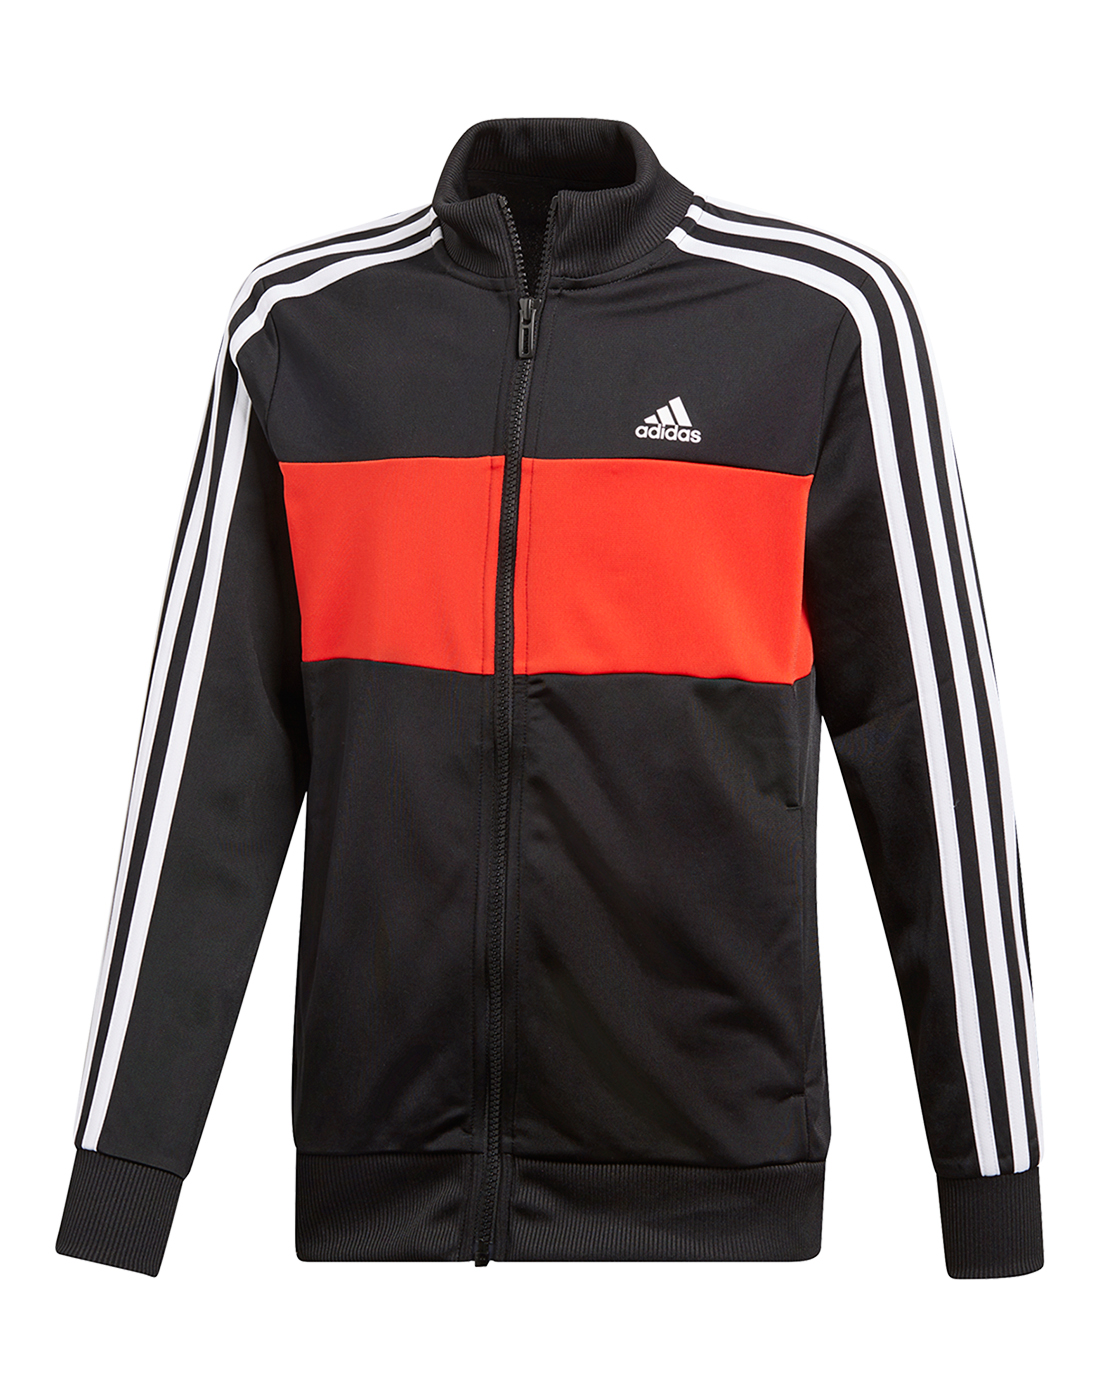 Boy's Black & Red adidas Tracksuit | Life Style Sports